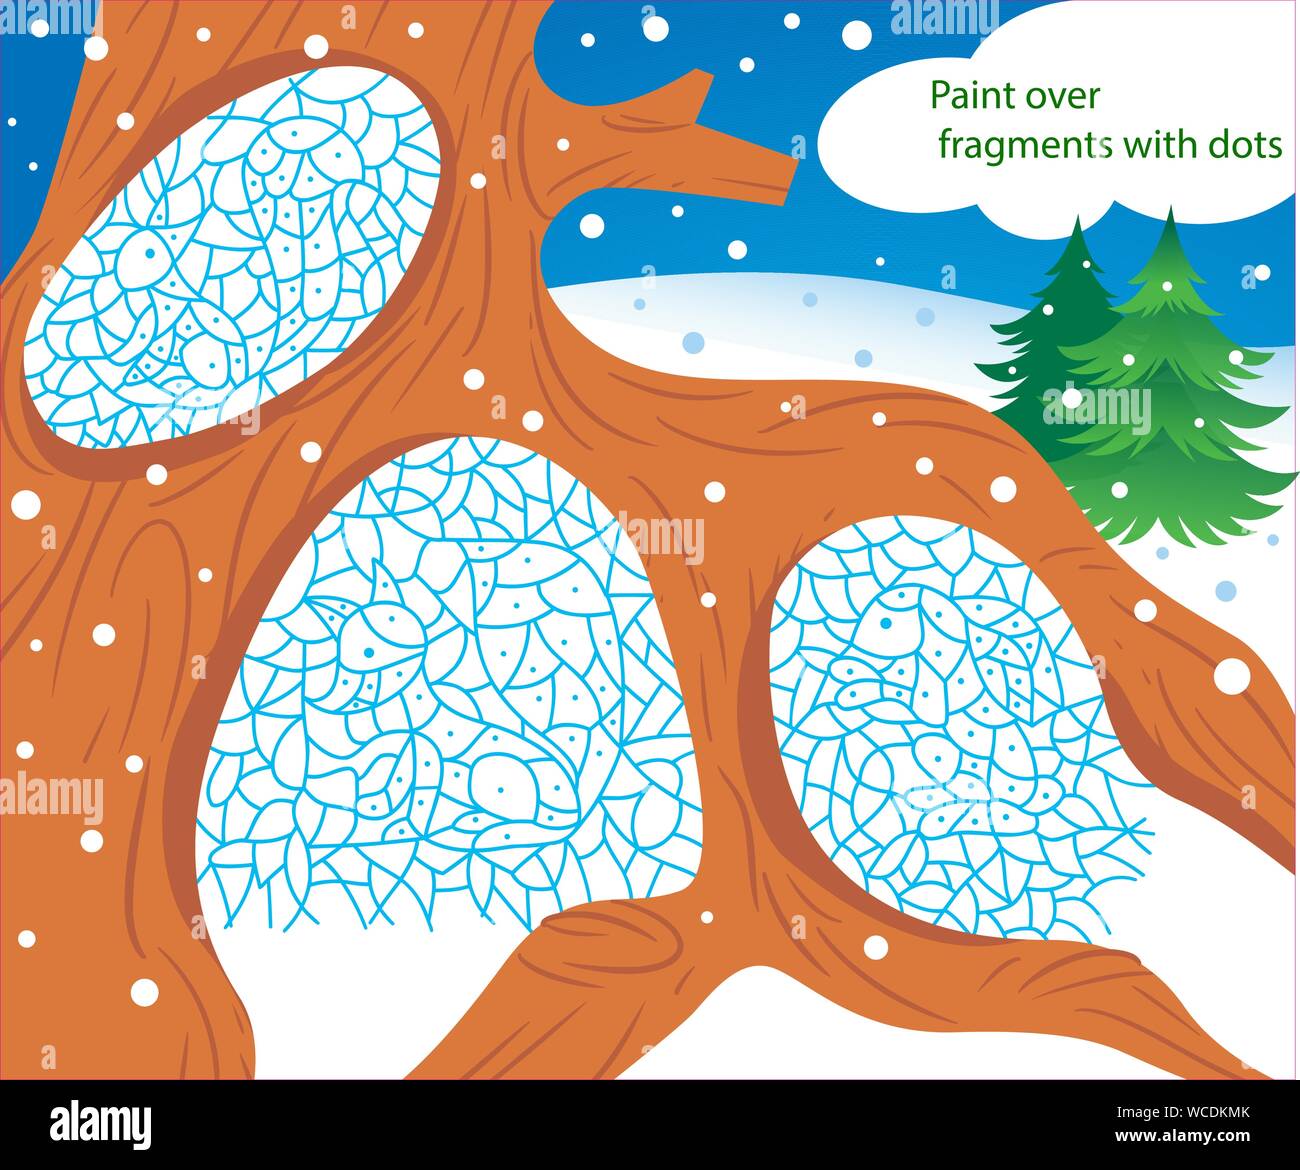 Vector illustration with a puzzle in which it is necessary to paint over fragments with dots to find out which animals hibernate where. Stock Vector